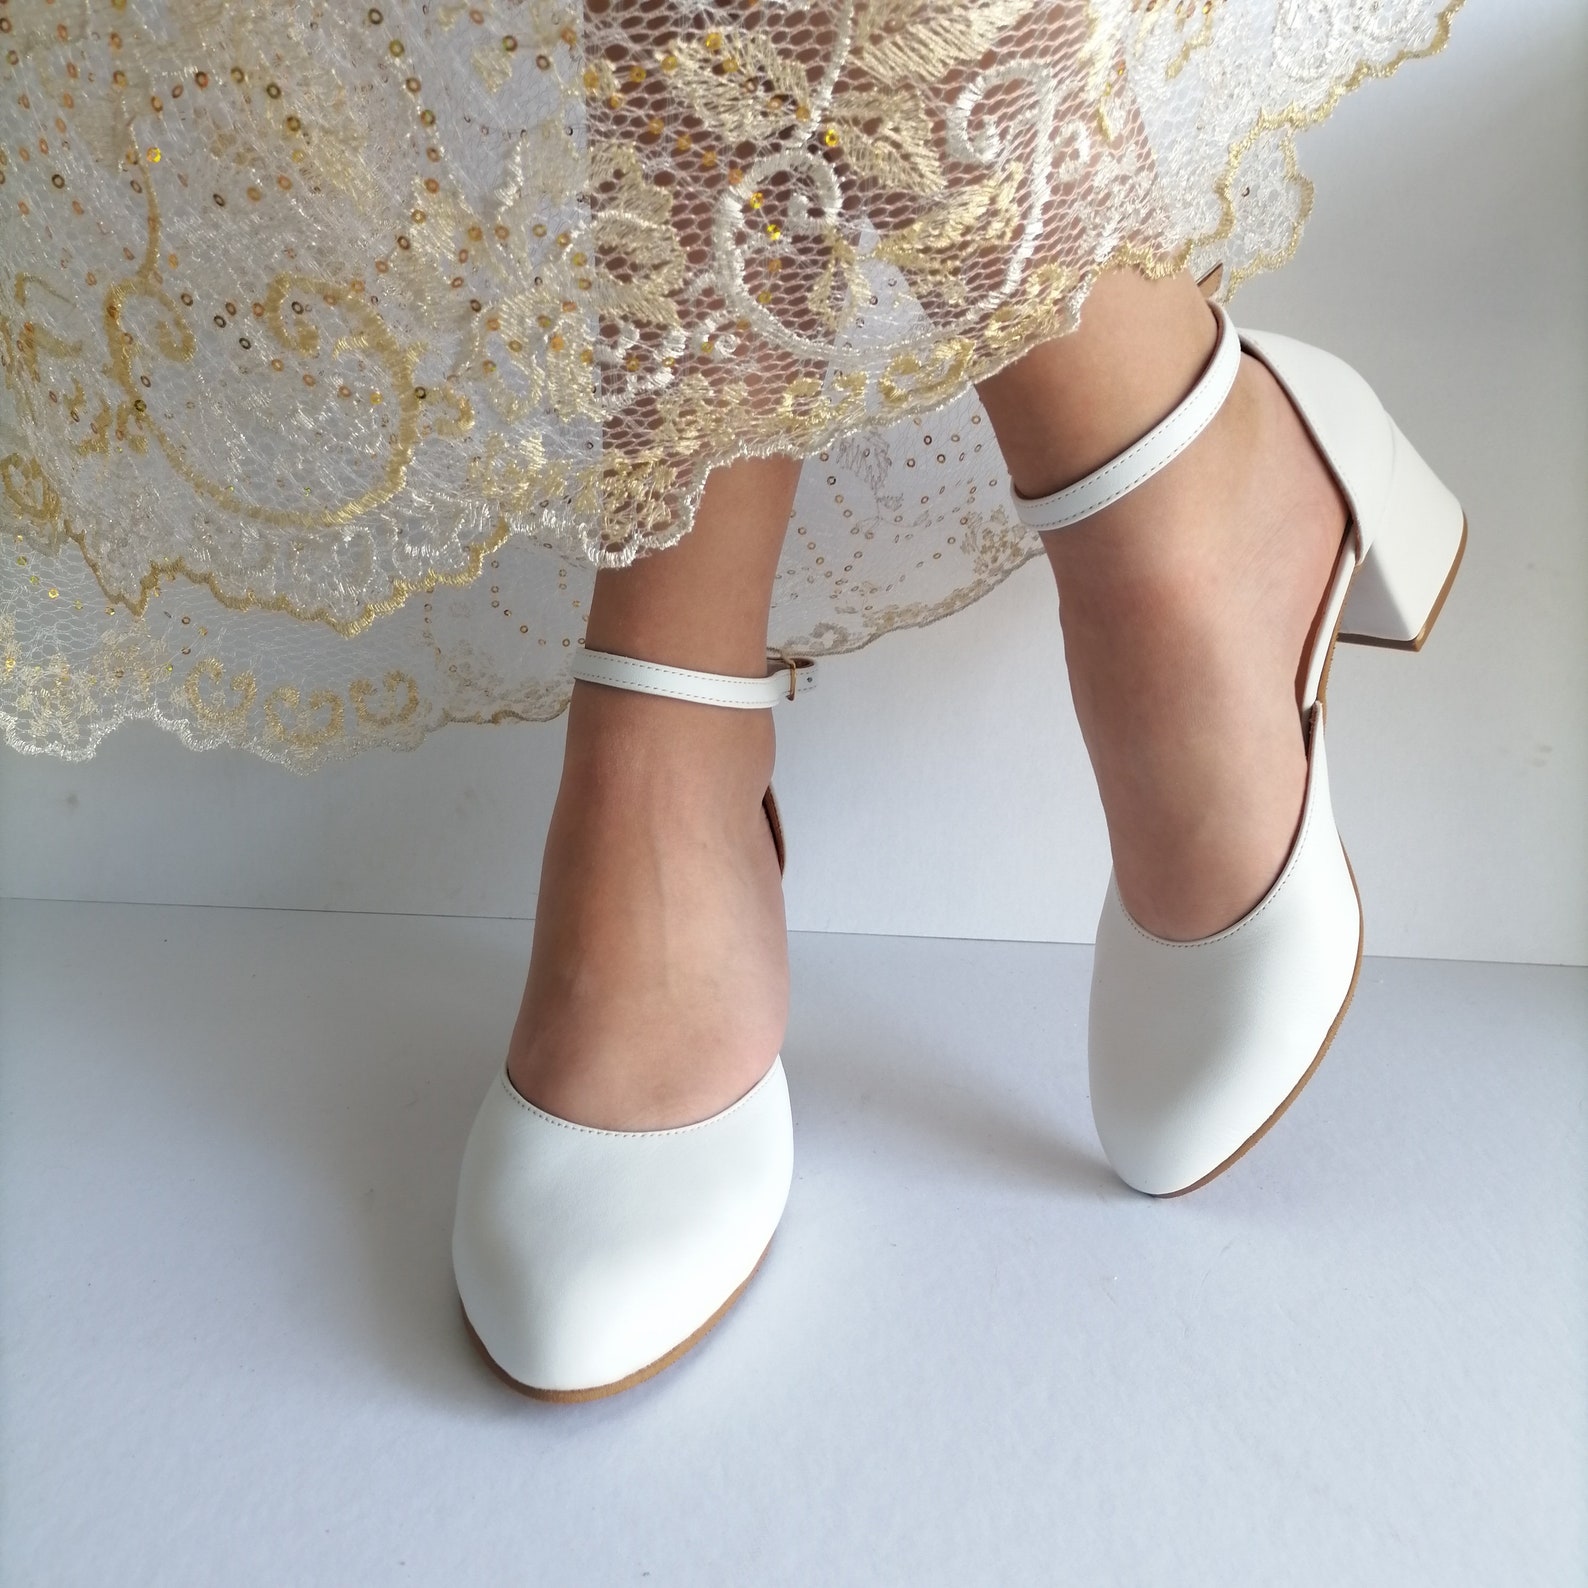 Low Block Heel Wedding Shoes White Leather Pumps Closed Toe | Etsy